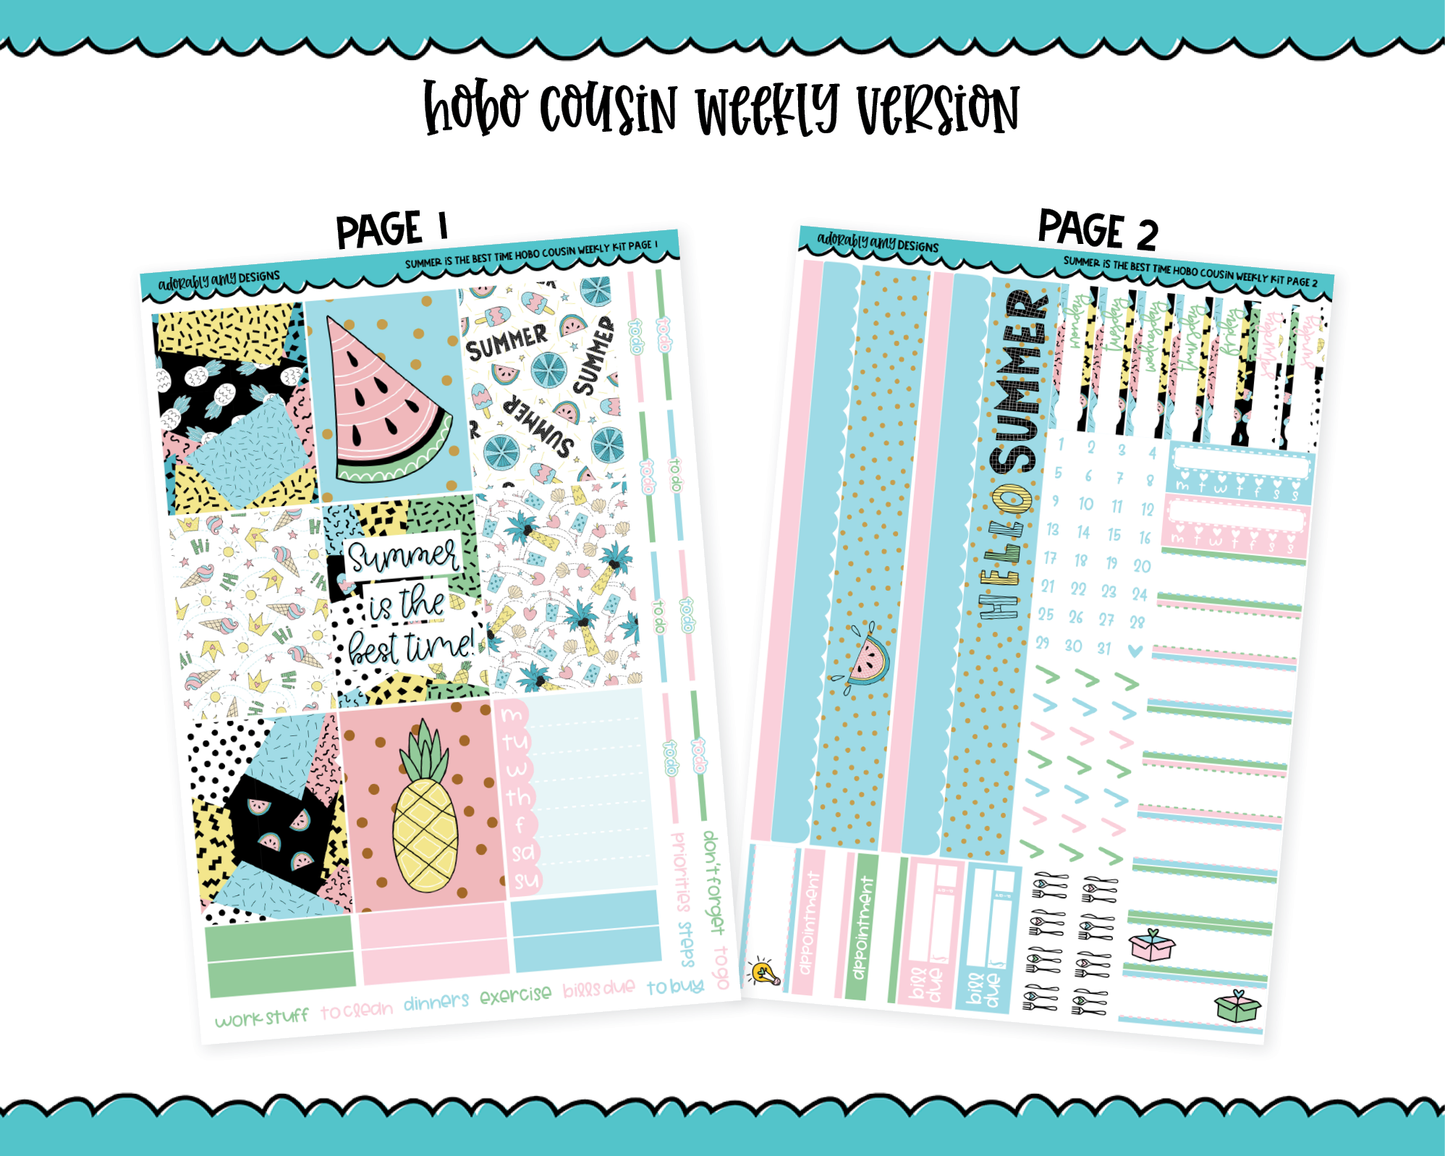 Hobonichi Cousin Weekly Summer is the Best Time Planner Sticker Kit for Hobo Cousin or Similar Planners